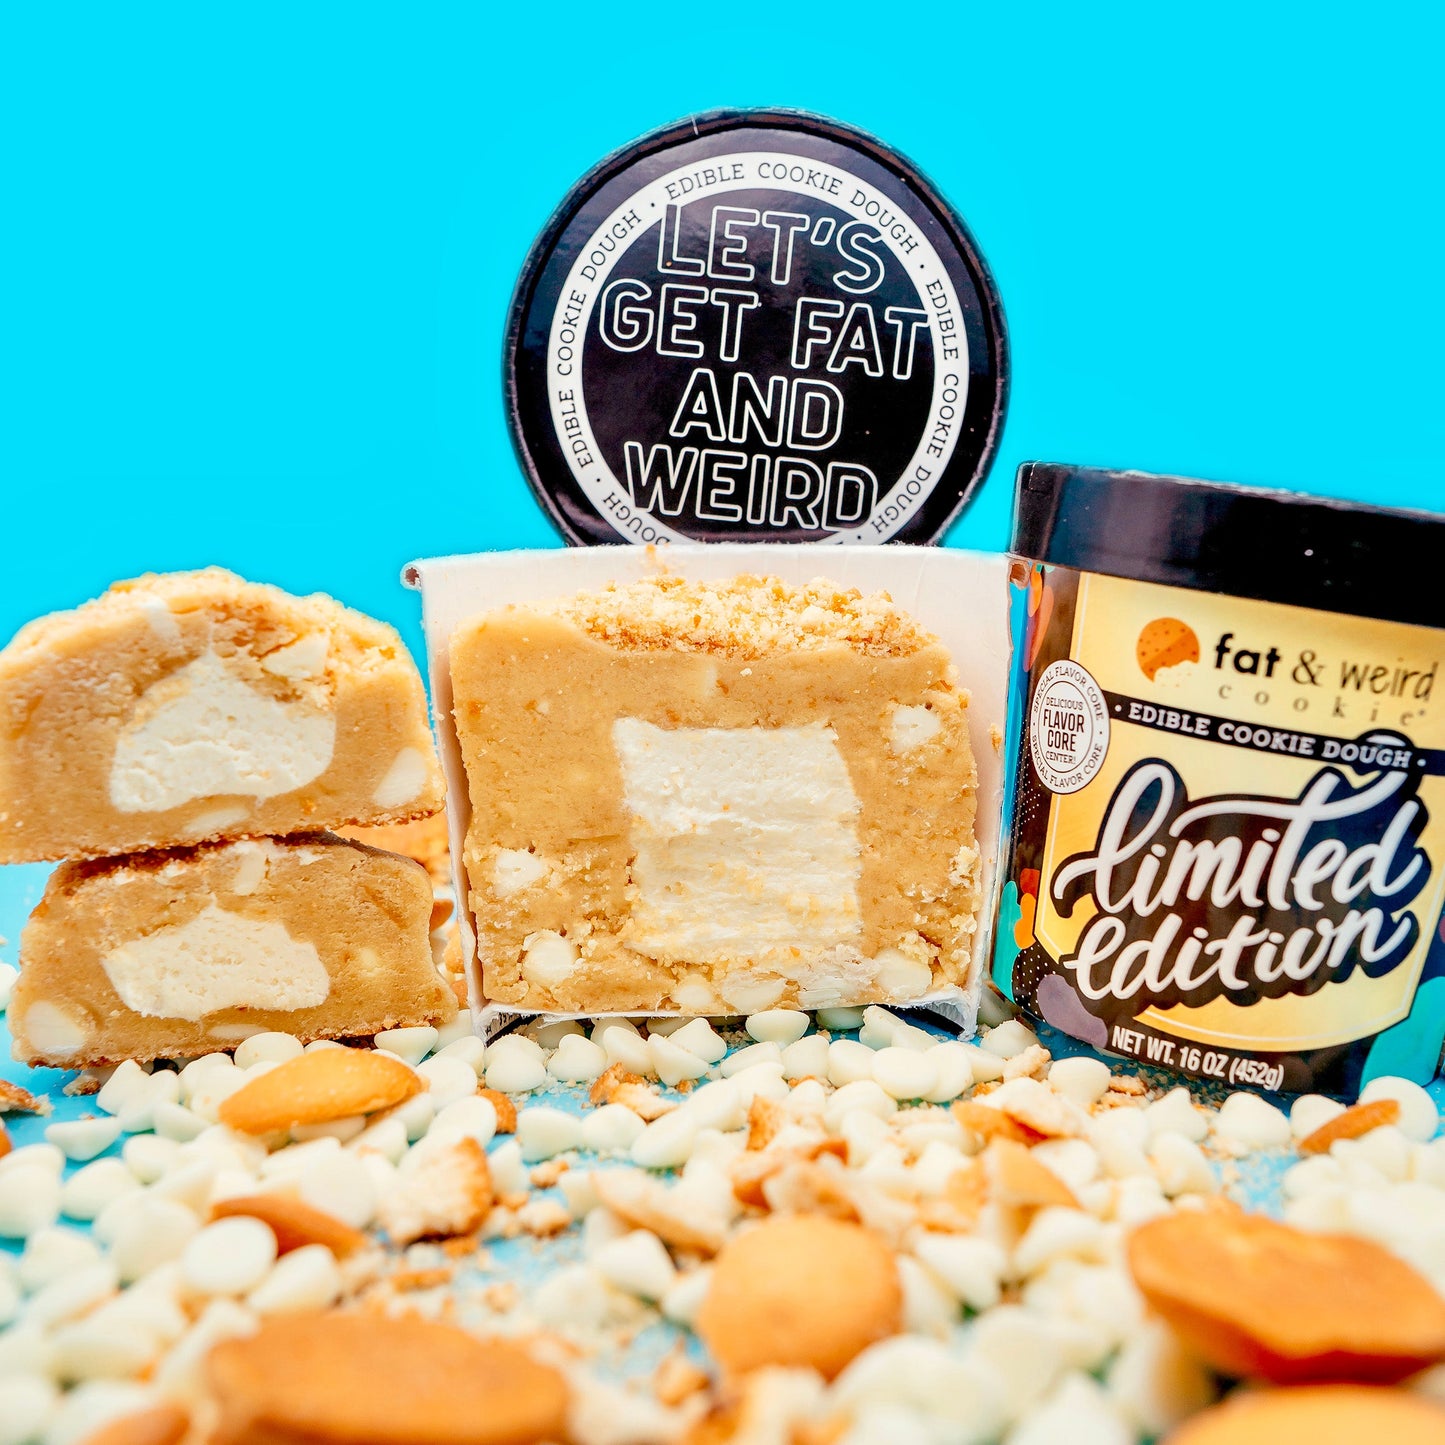 Limited Edition Edible Cookie Dough - Don't Slip Cookie Dough Fat & Weird Cookie 